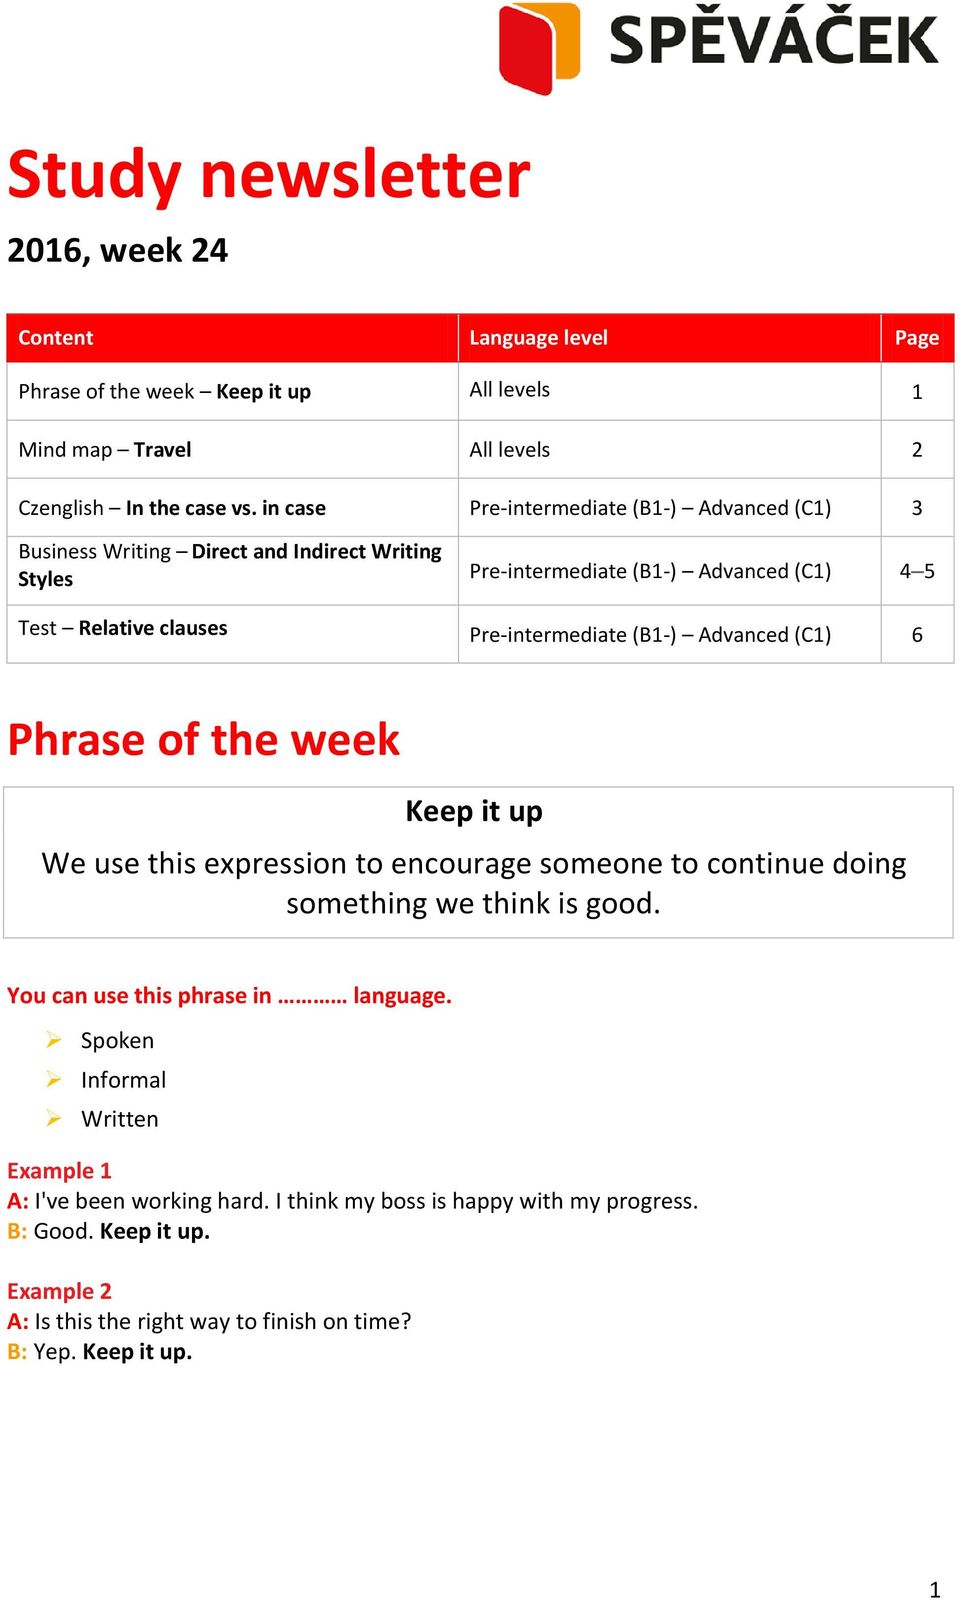 (B1-) Advanced (C1) 6 Phrase of the week Keep it up We use this expression to encourage someone to continue doing something we think is good. You can use this phrase in language.